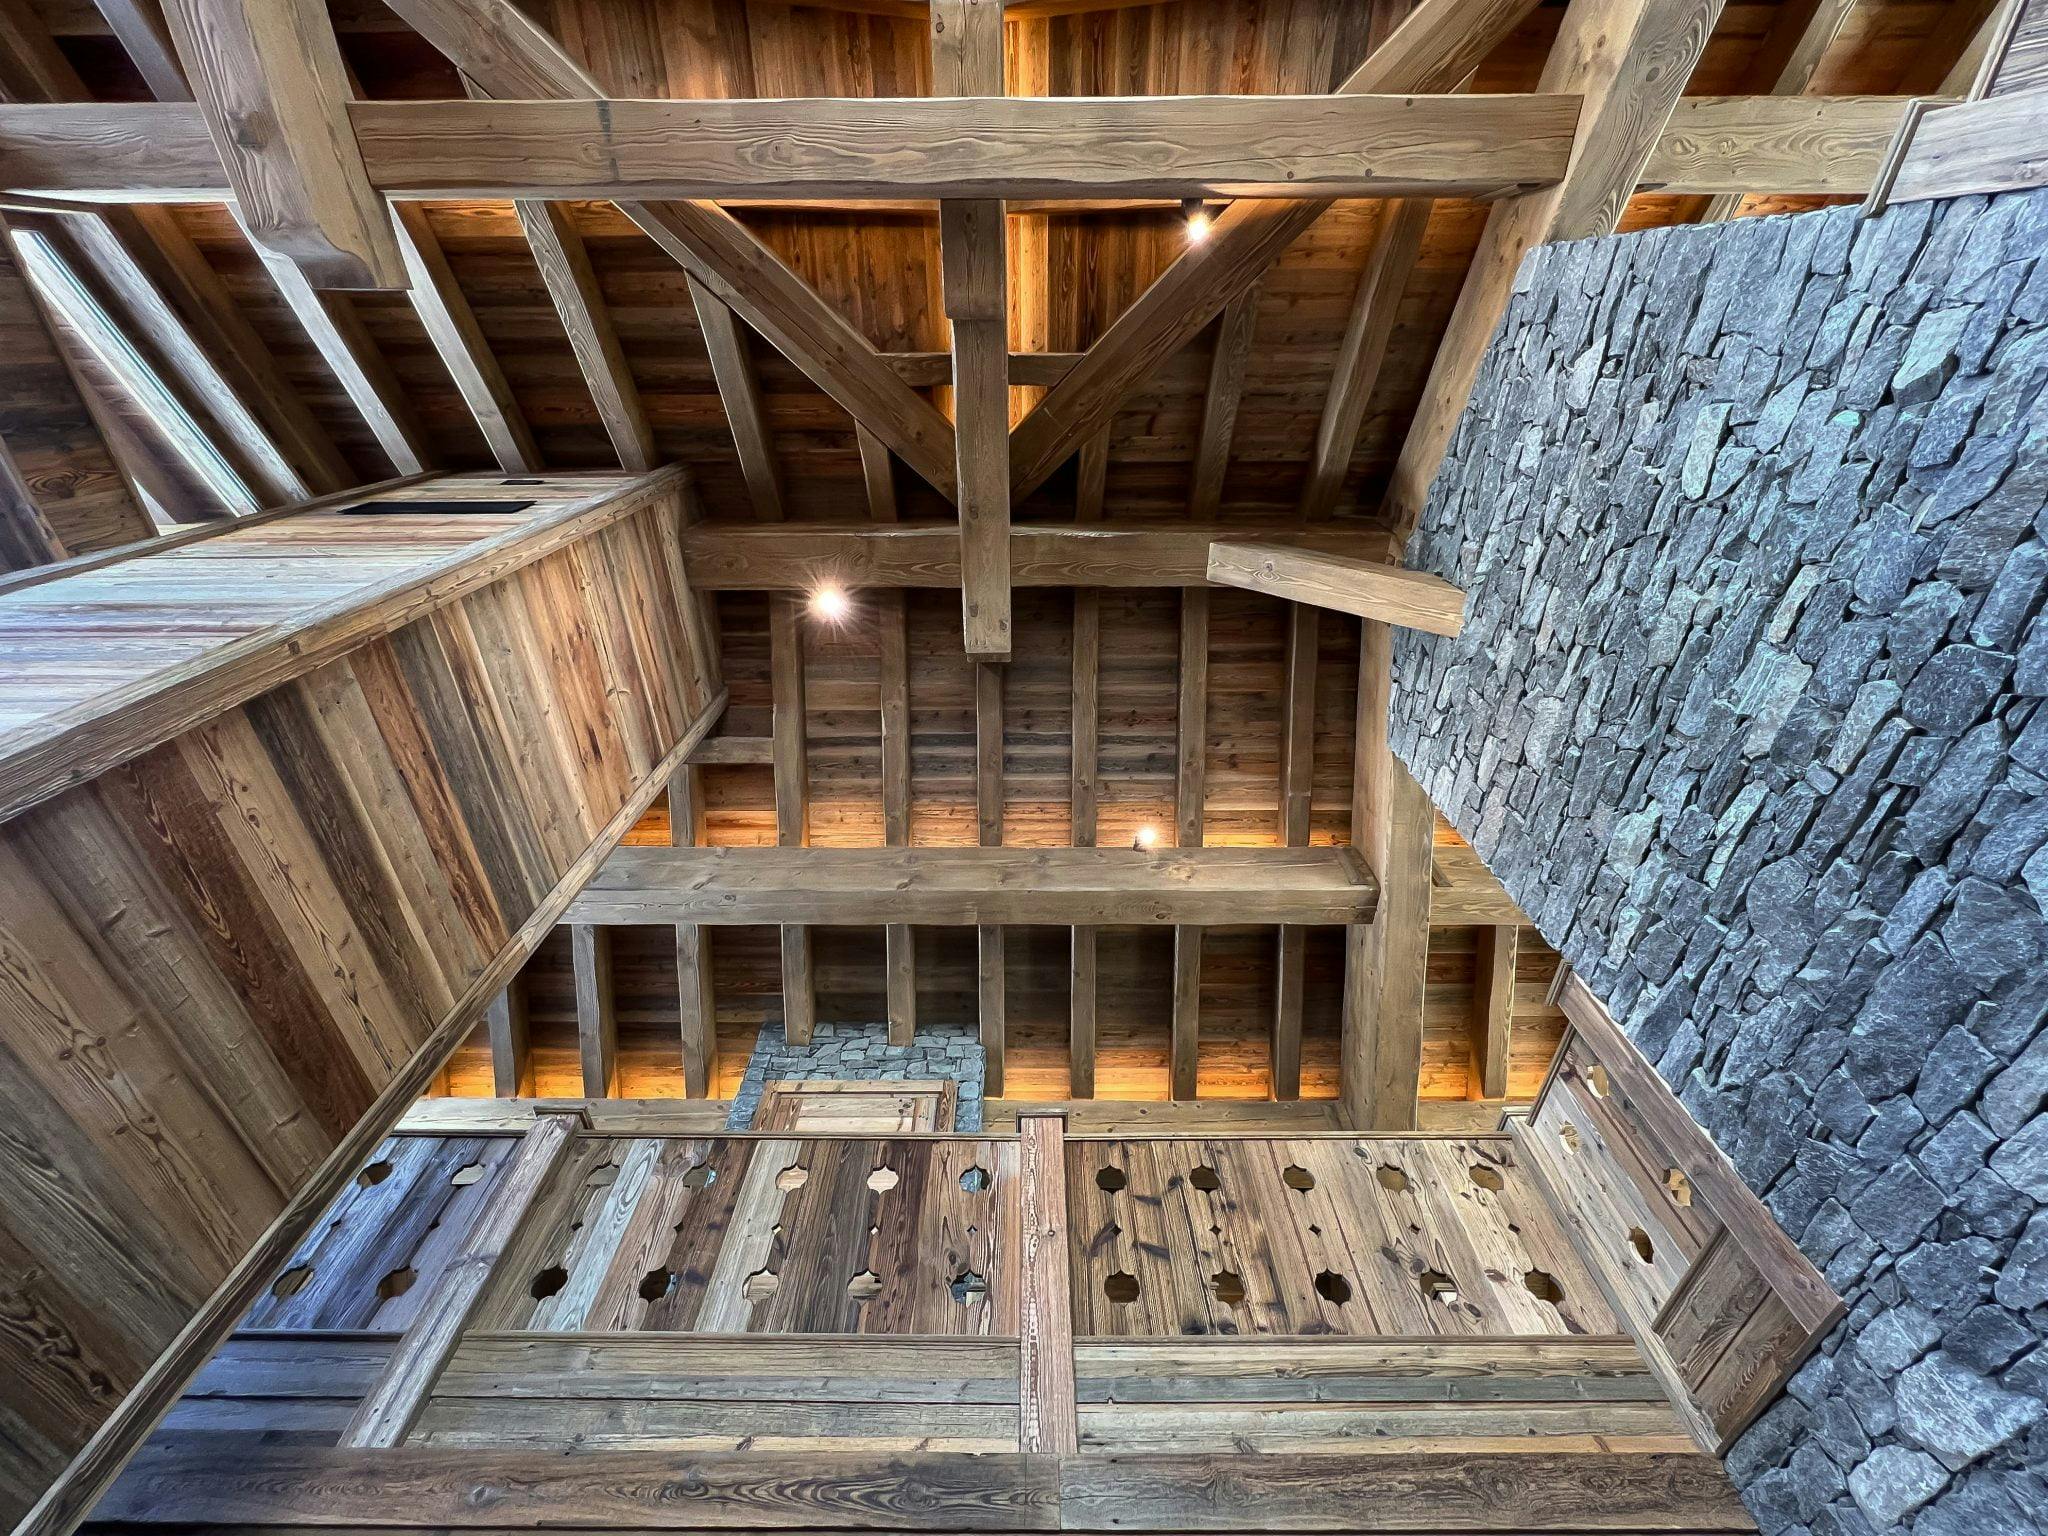 structure of the chalet, large wooden beams